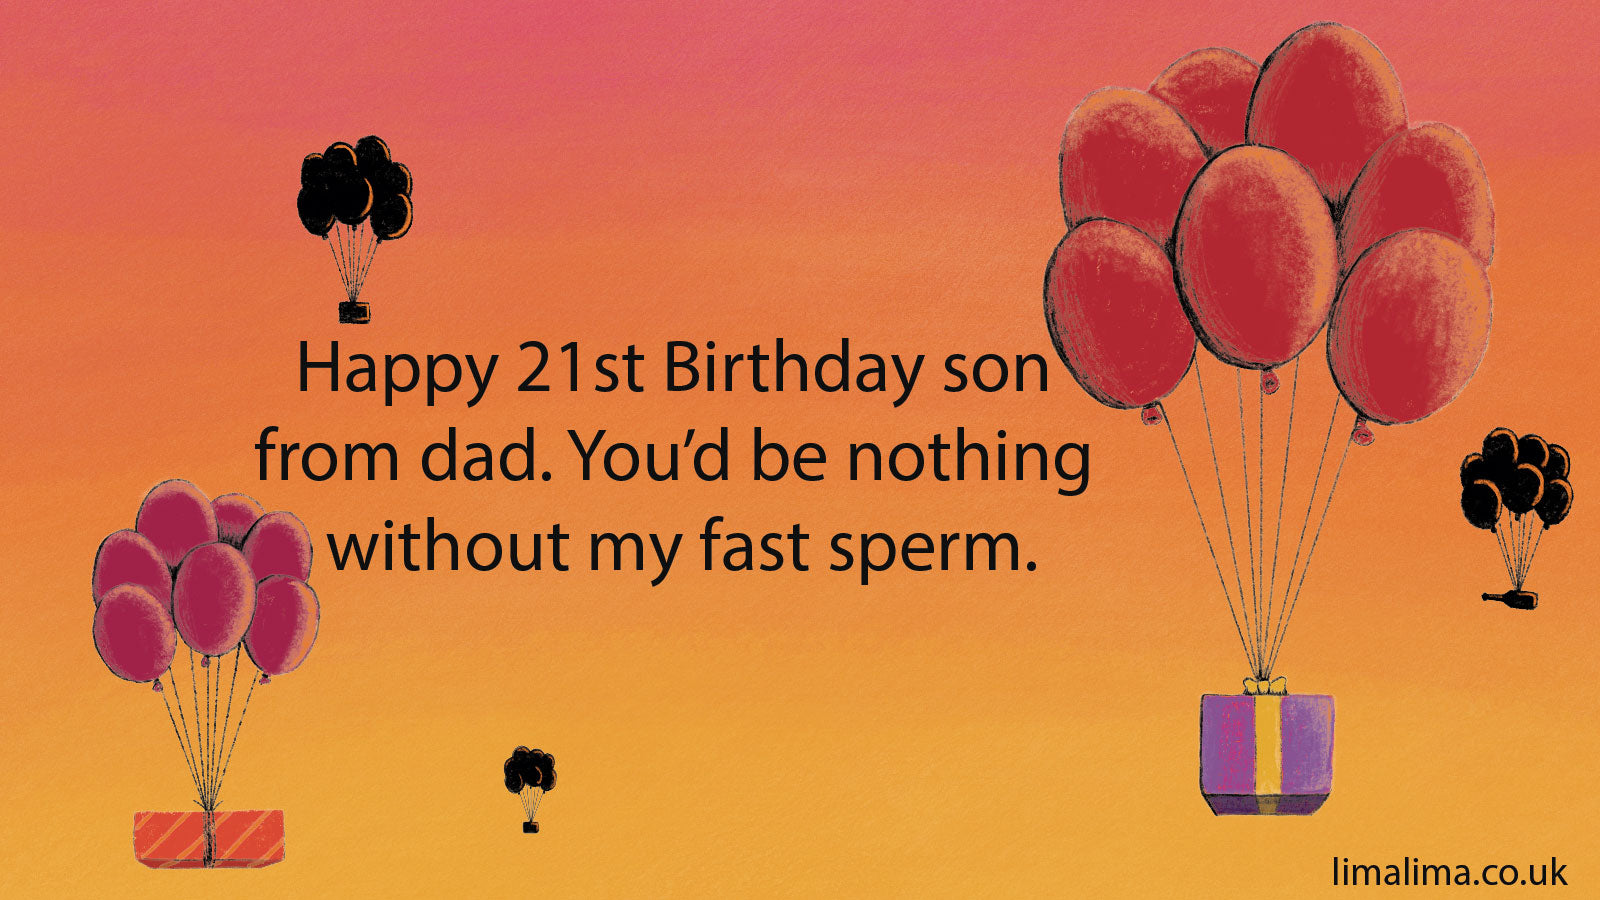 Funny 21st Birthday Messages (Warning Rude)